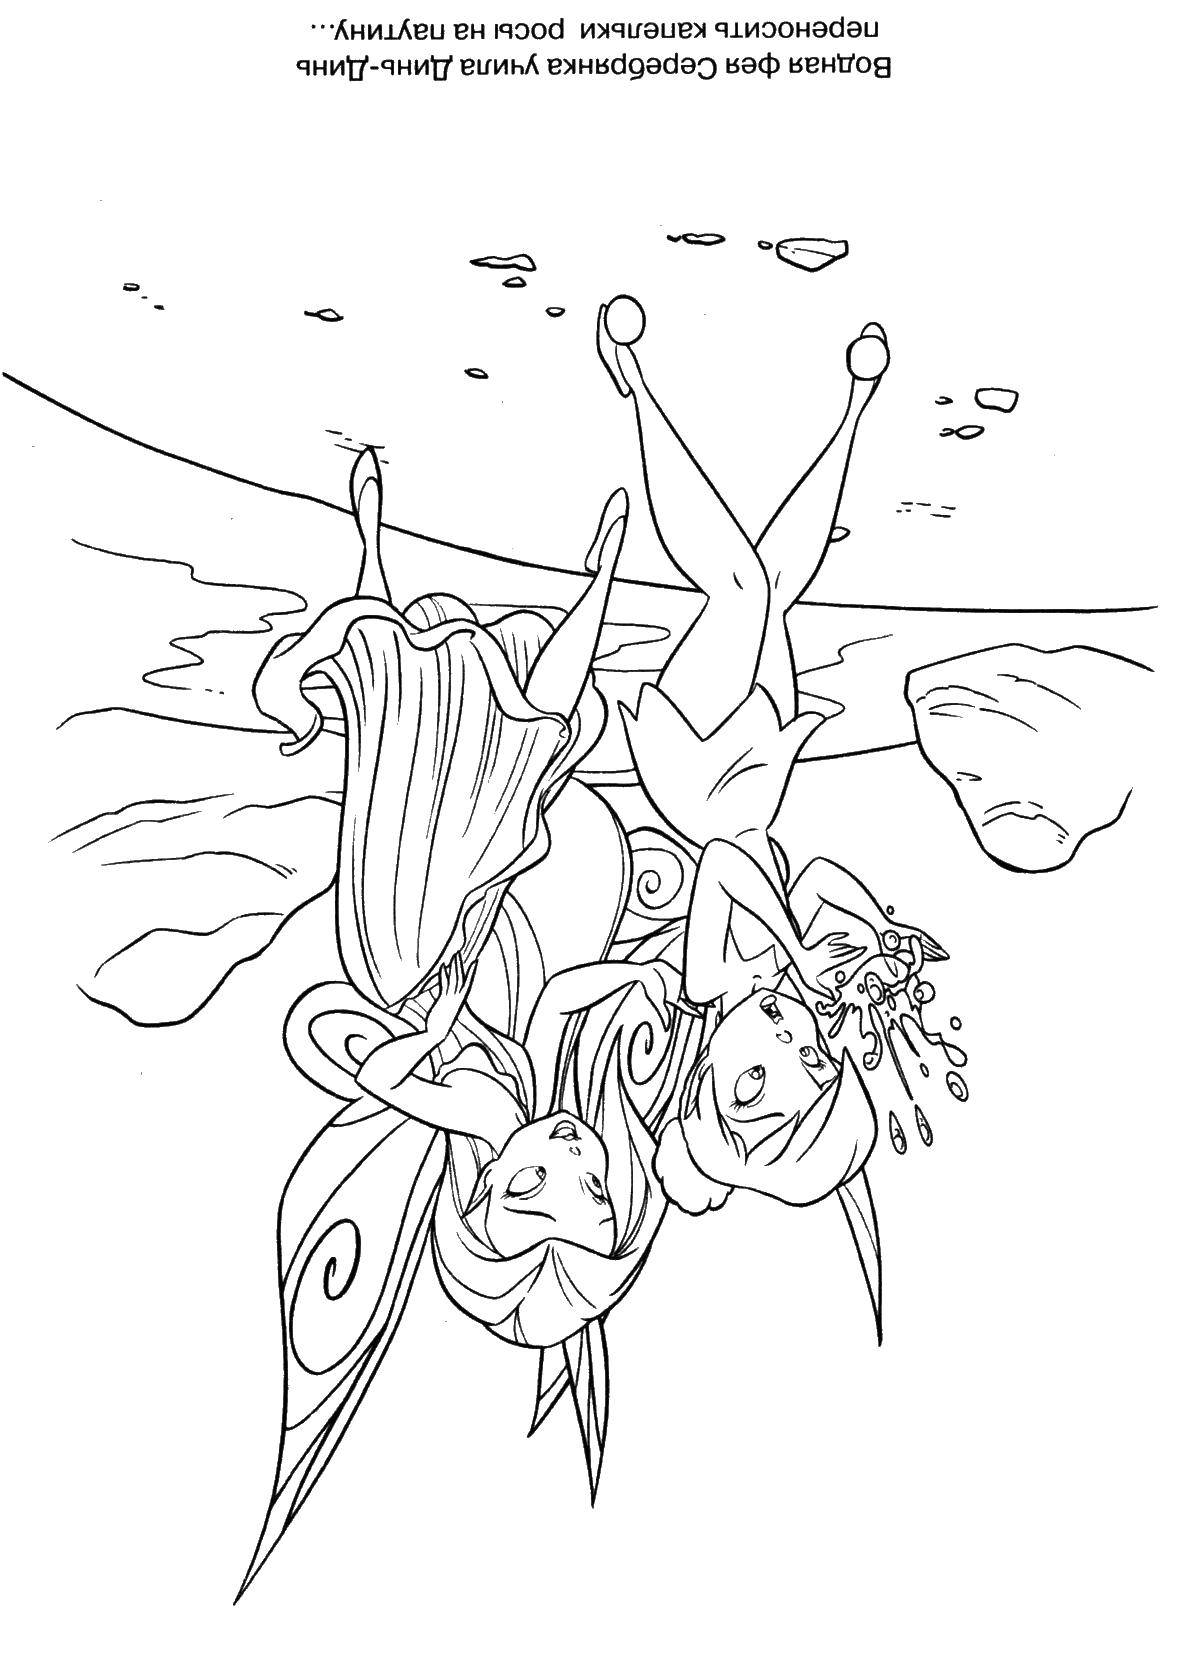 Coloring Tinker bell and Rosetta. Category fairies. Tags:  fairies Dingding.